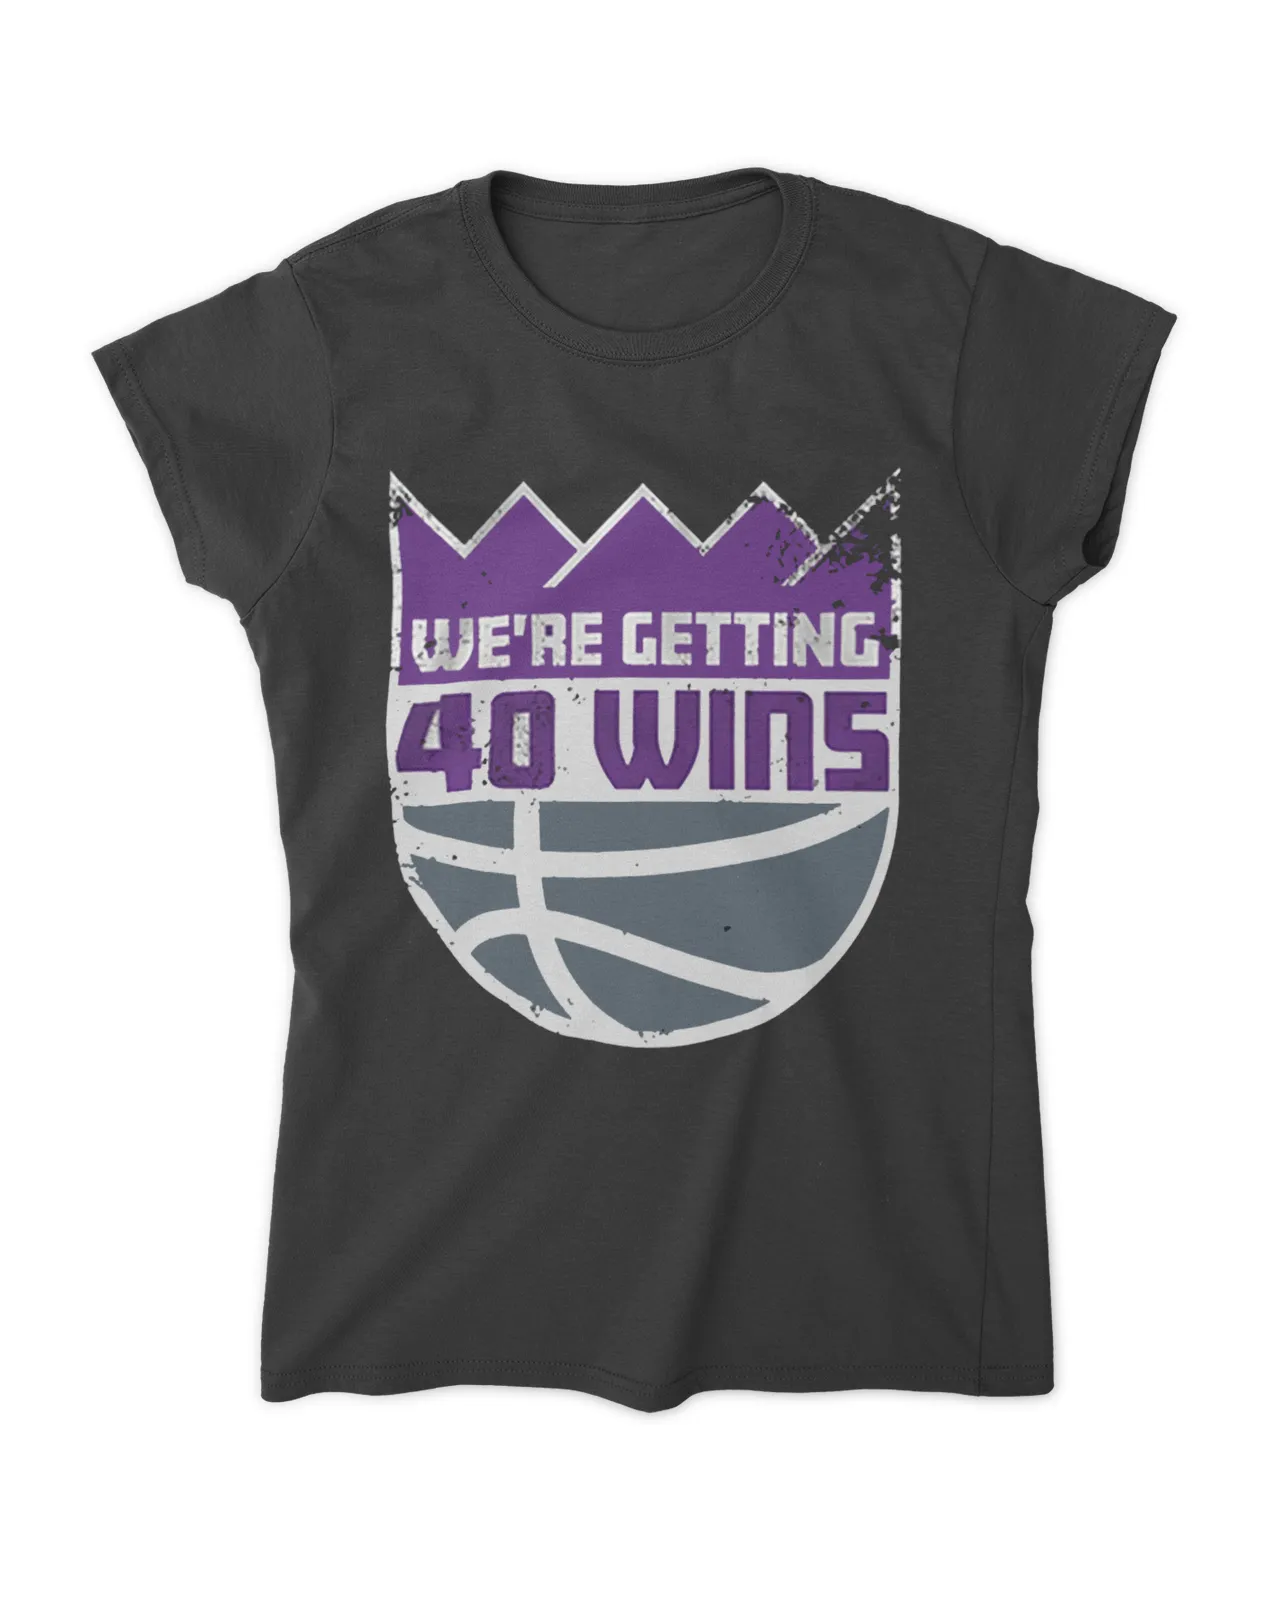 We're Getting 40 Wins Shirt